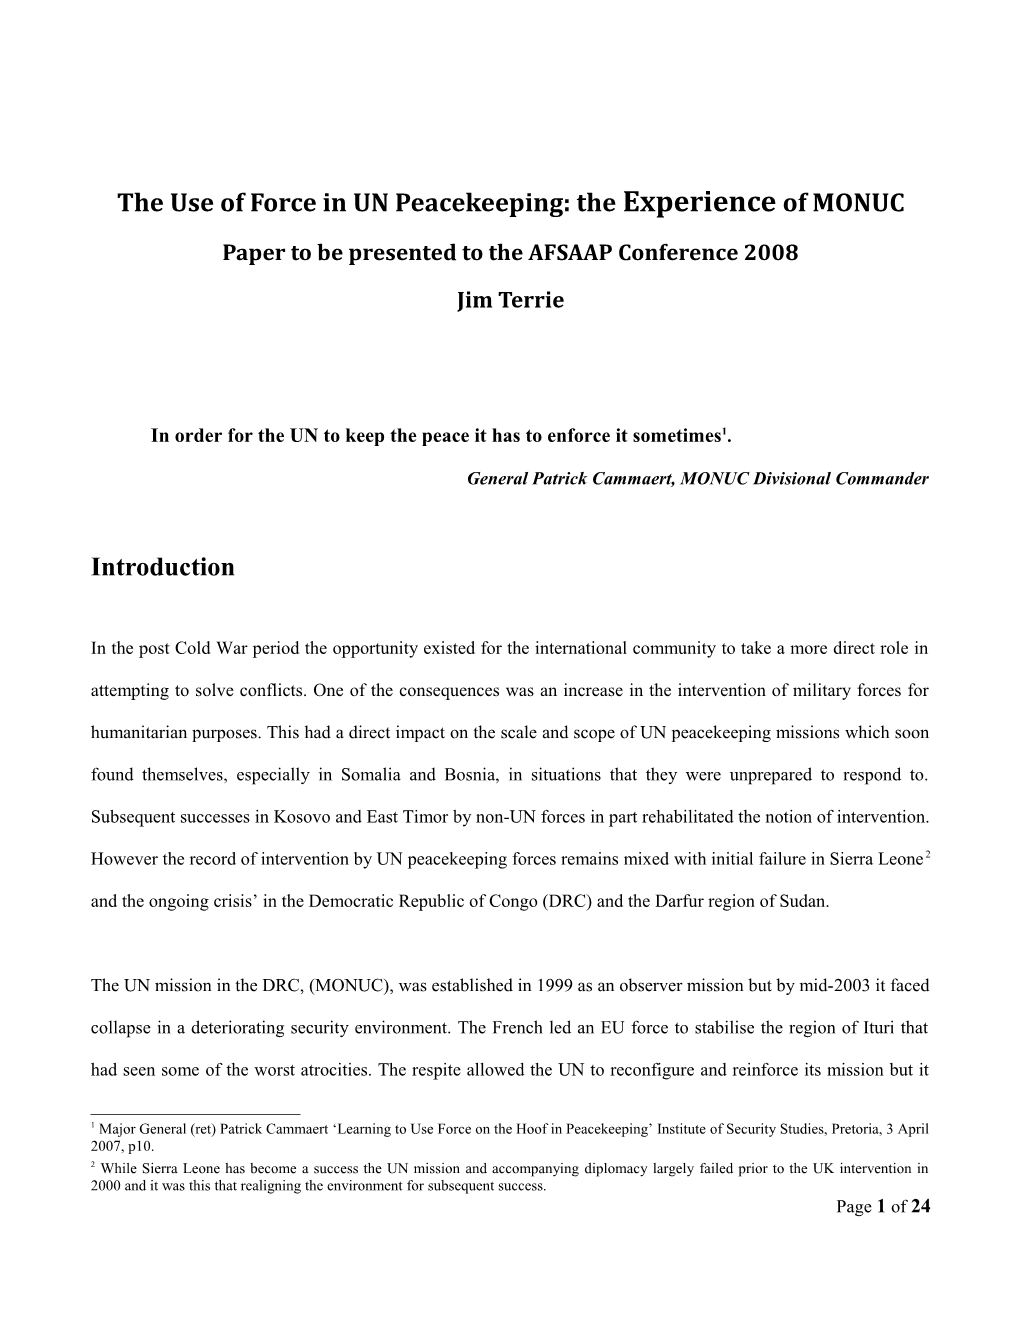 The Use of Force in UN Peacekeeping: the Experience of MONUC